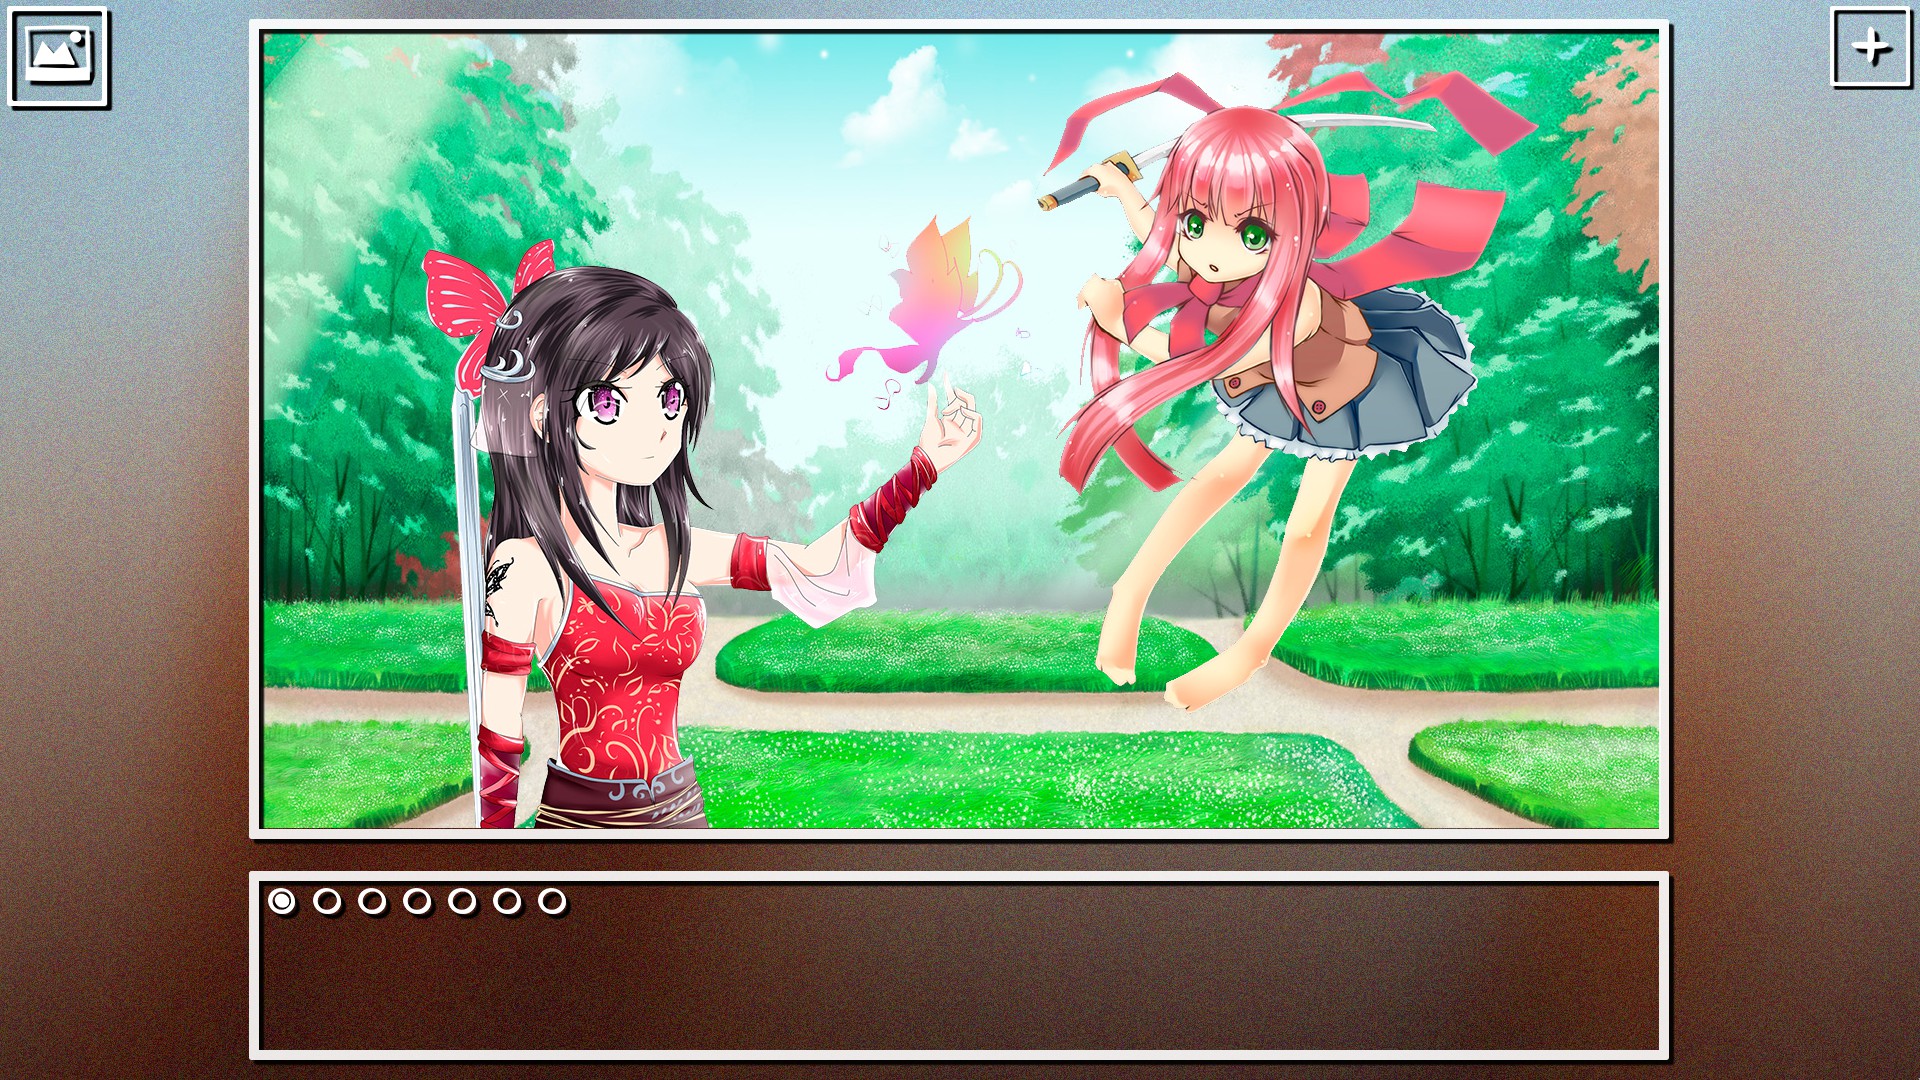 Super Jigsaw Puzzle: Anime Reloaded on Steam